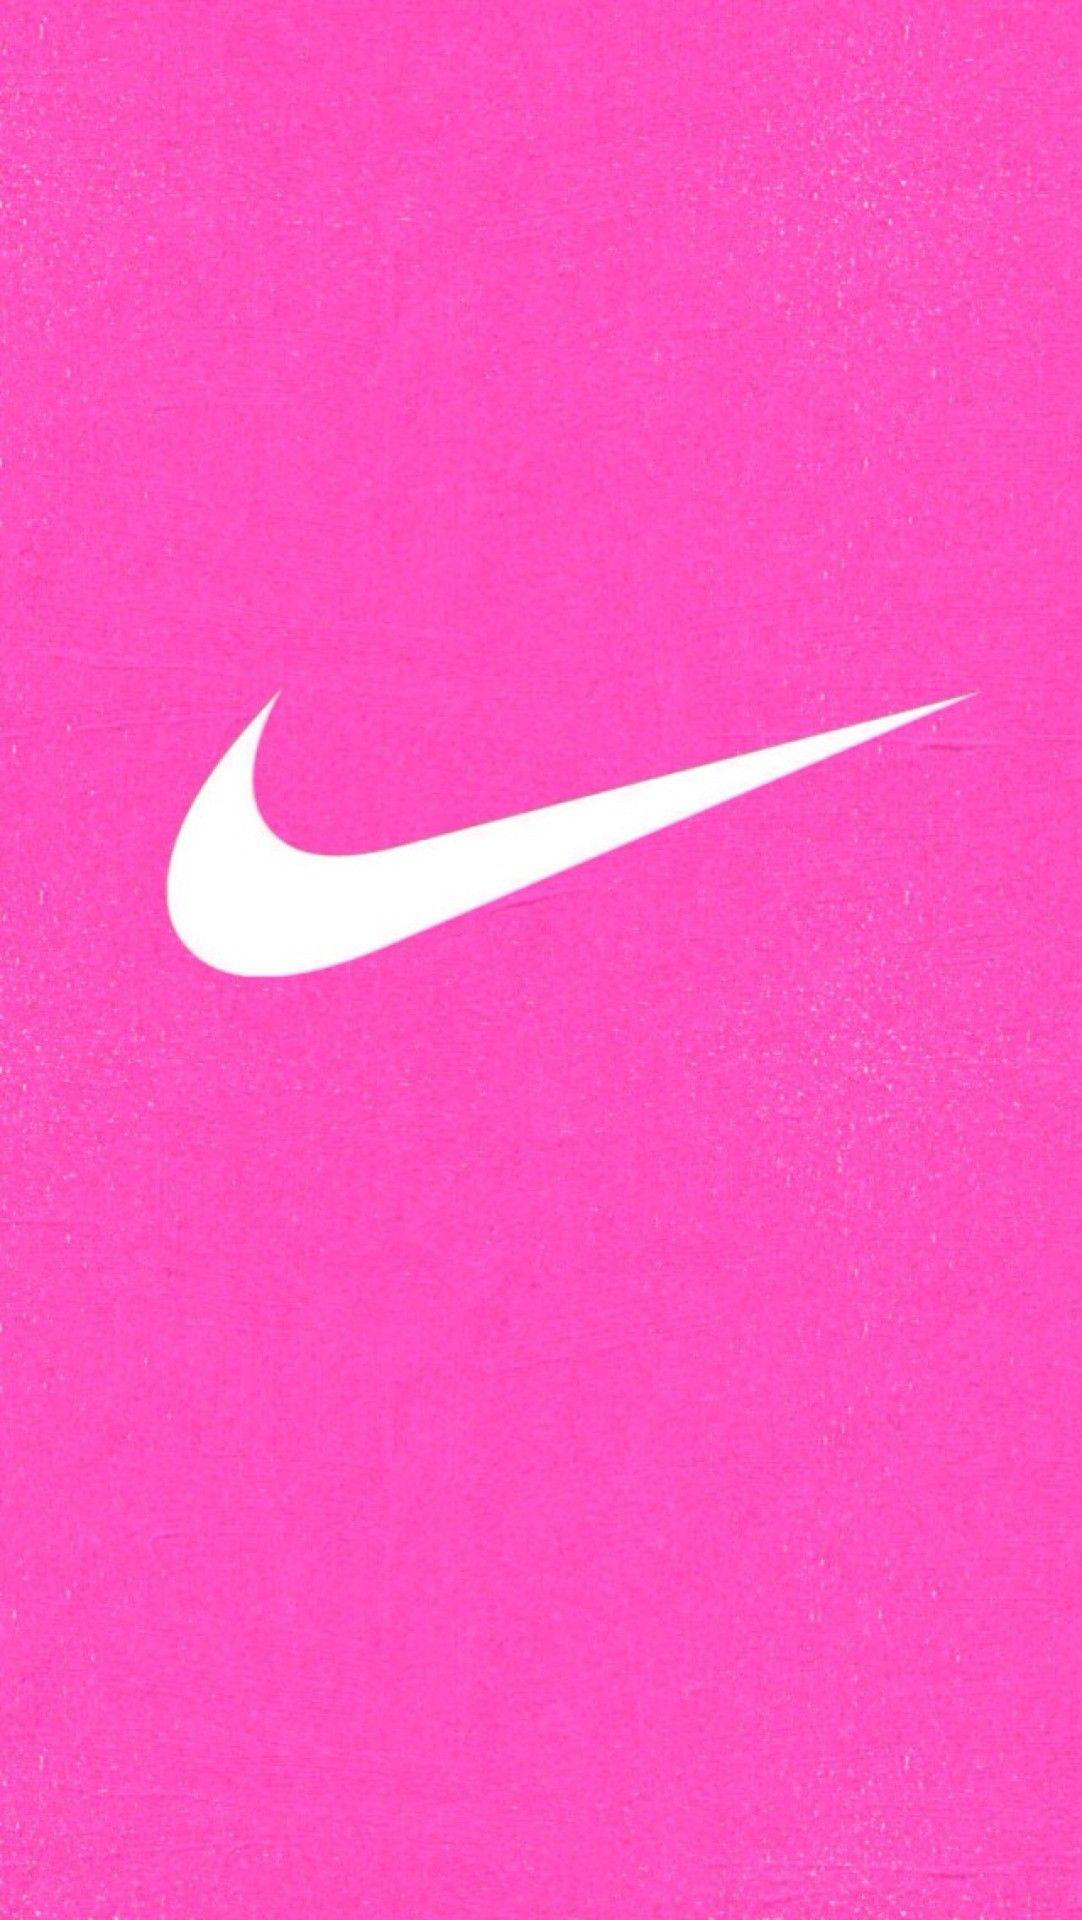 Download A Pink And White Pattern With Nike Logos Wallpaper